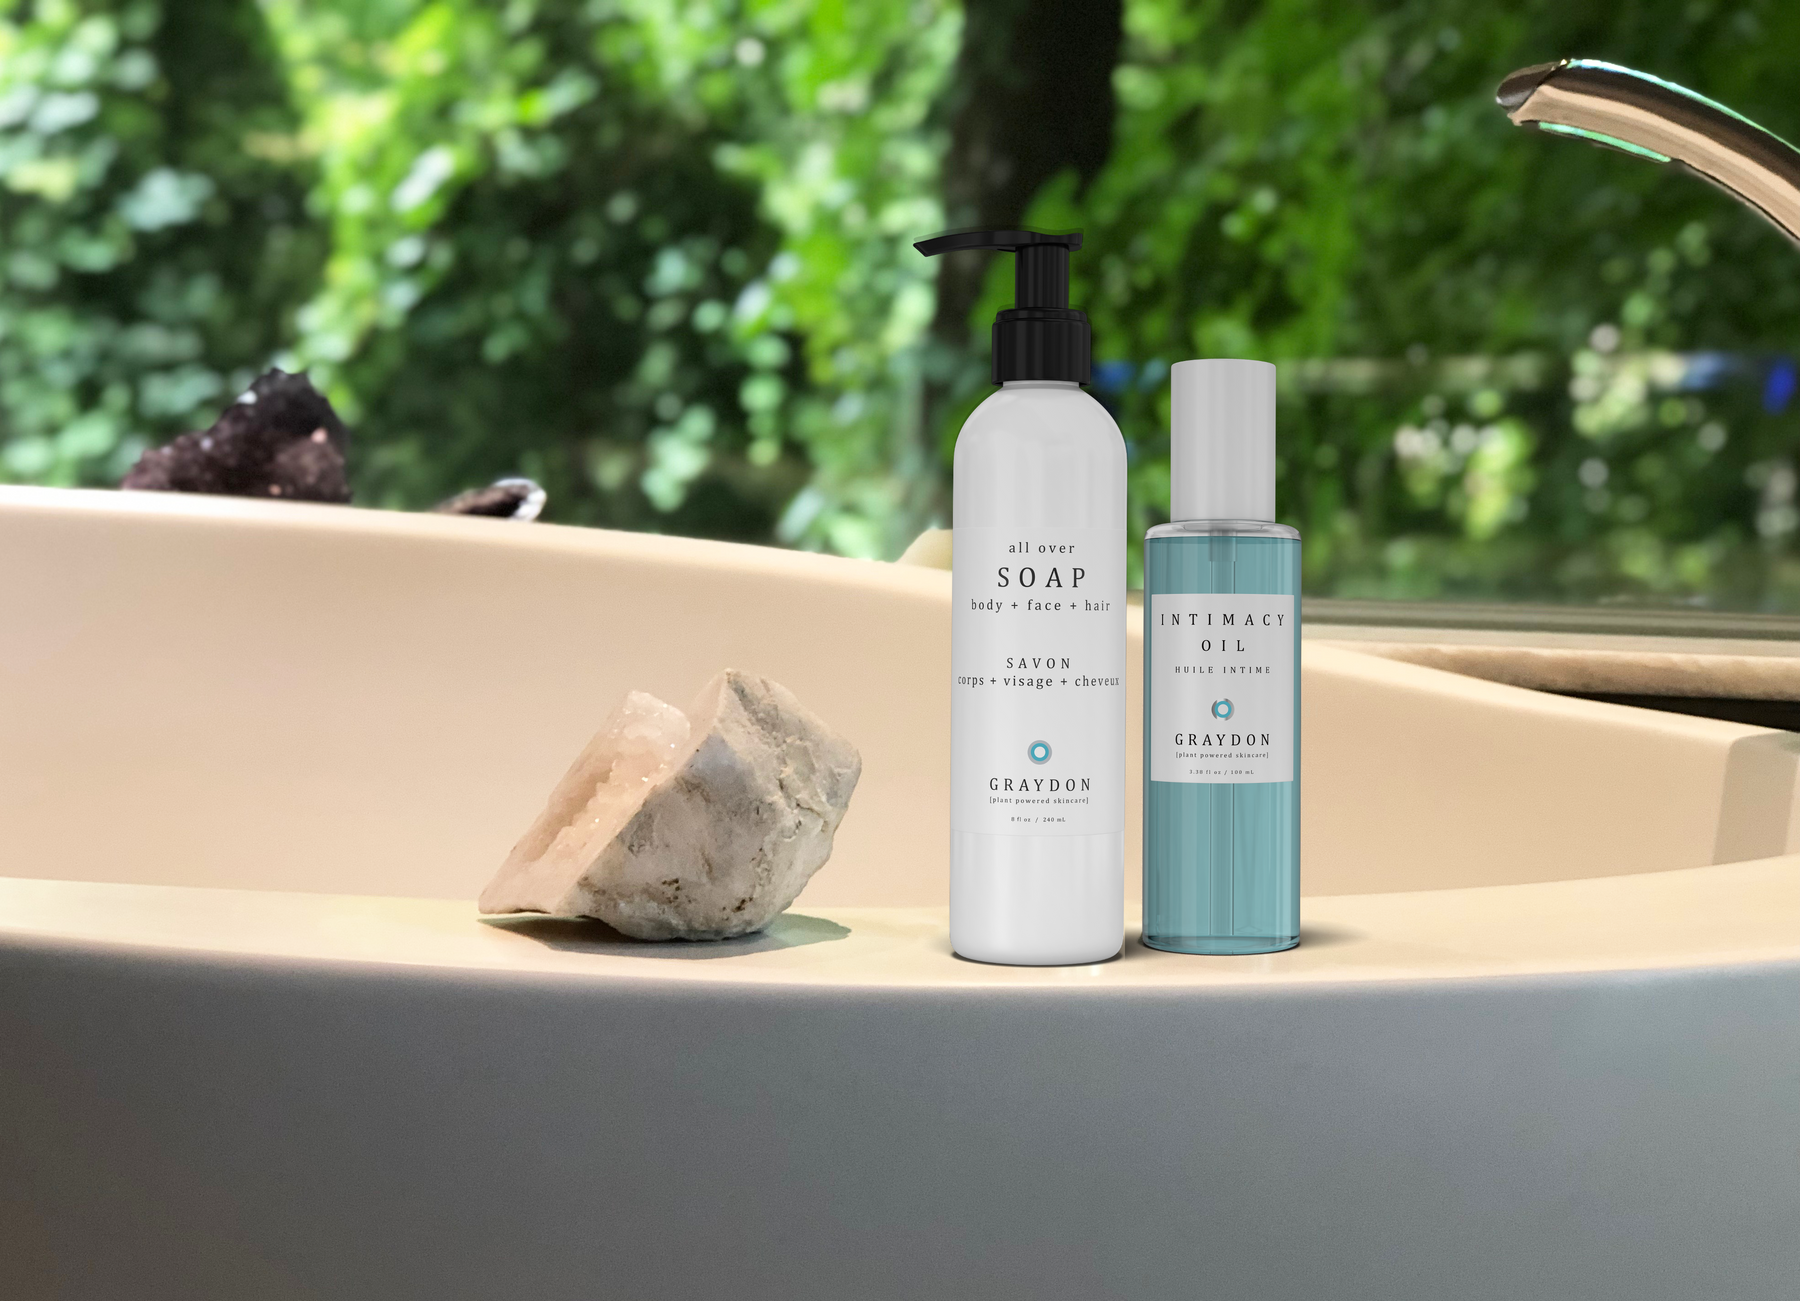 A bottle of vegan soap for sensitive skin next to a bottle of blue-coloured vegan body oil on the ledge of a chic-looking bathtub.